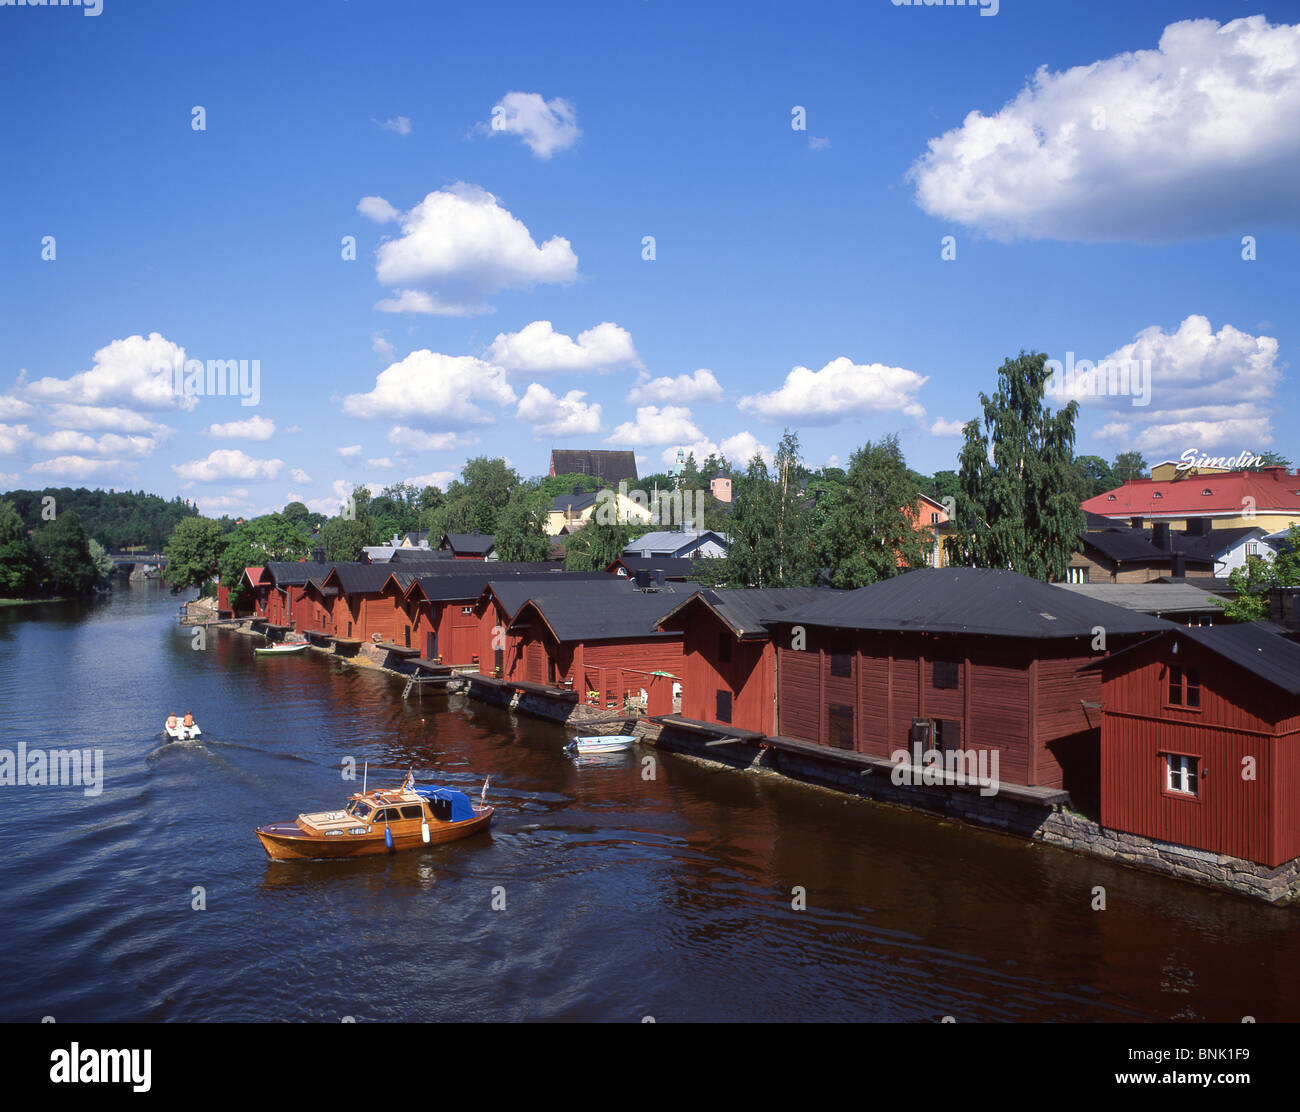 Wooden warehouse buildings on waterfront, Old Town, Porvoo, Uusimaa Region, Republic of Finland Stock Photo